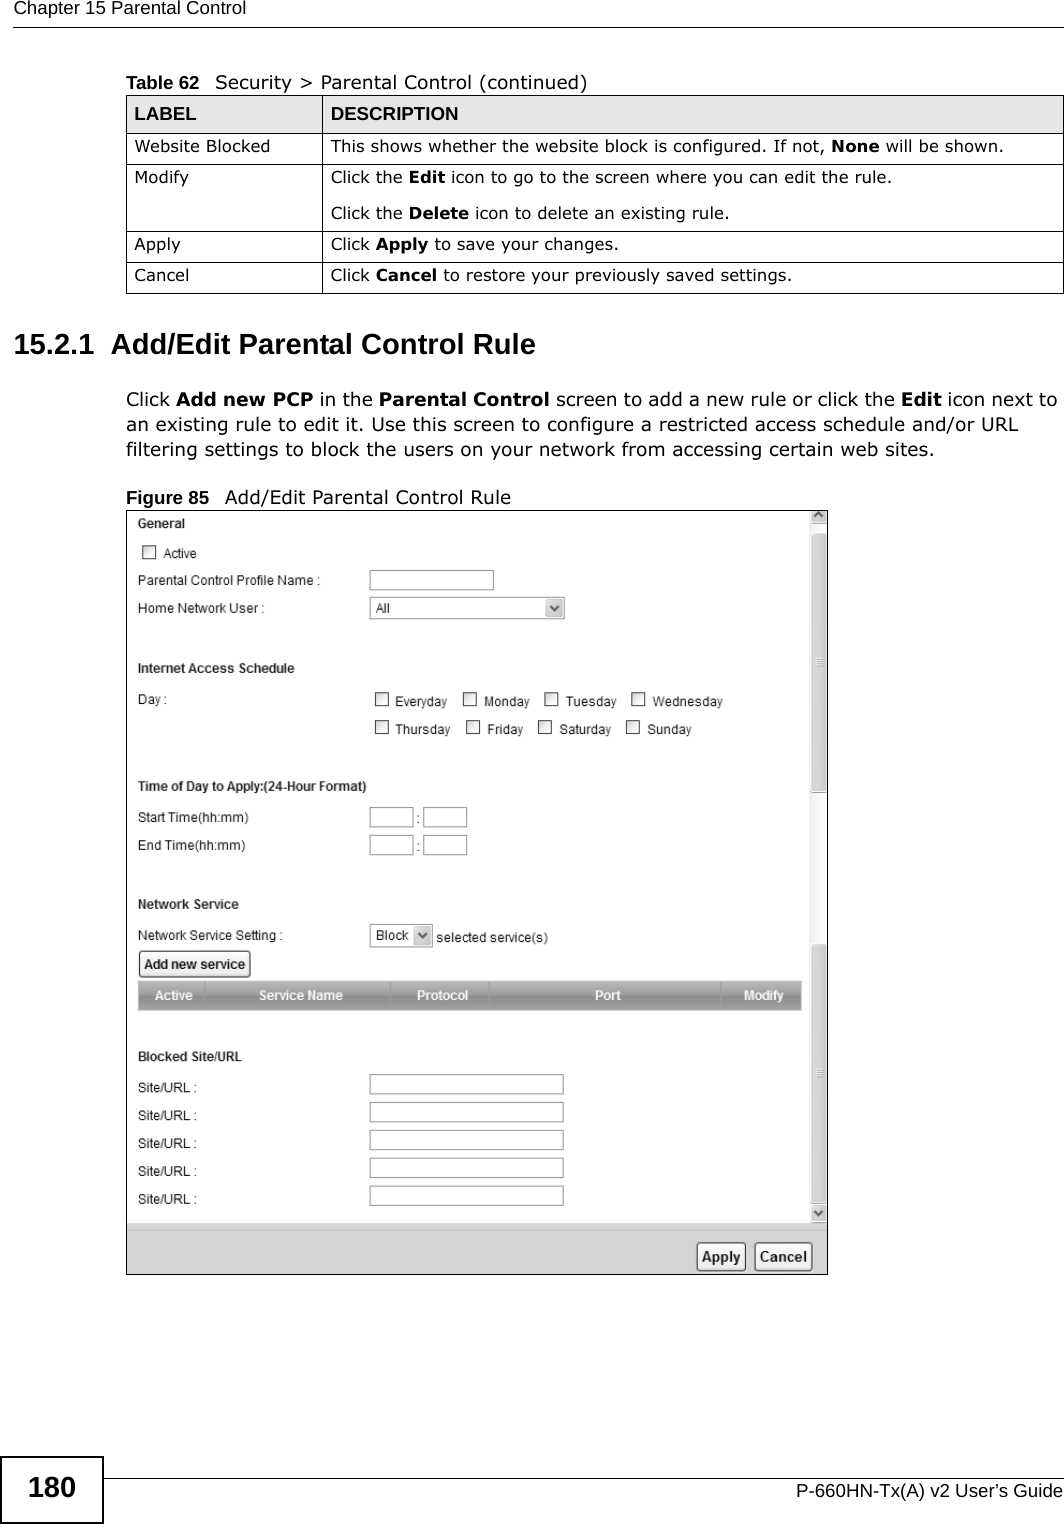 Chapter 15 Parental ControlP-660HN-Tx(A) v2 User’s Guide18015.2.1  Add/Edit Parental Control RuleClick Add new PCP in the Parental Control screen to add a new rule or click the Edit icon next to an existing rule to edit it. Use this screen to configure a restricted access schedule and/or URL filtering settings to block the users on your network from accessing certain web sites.Figure 85   Add/Edit Parental Control Rule Website Blocked This shows whether the website block is configured. If not, None will be shown.Modify Click the Edit icon to go to the screen where you can edit the rule.Click the Delete icon to delete an existing rule.Apply Click Apply to save your changes.Cancel Click Cancel to restore your previously saved settings.Table 62   Security &gt; Parental Control (continued)LABEL DESCRIPTION